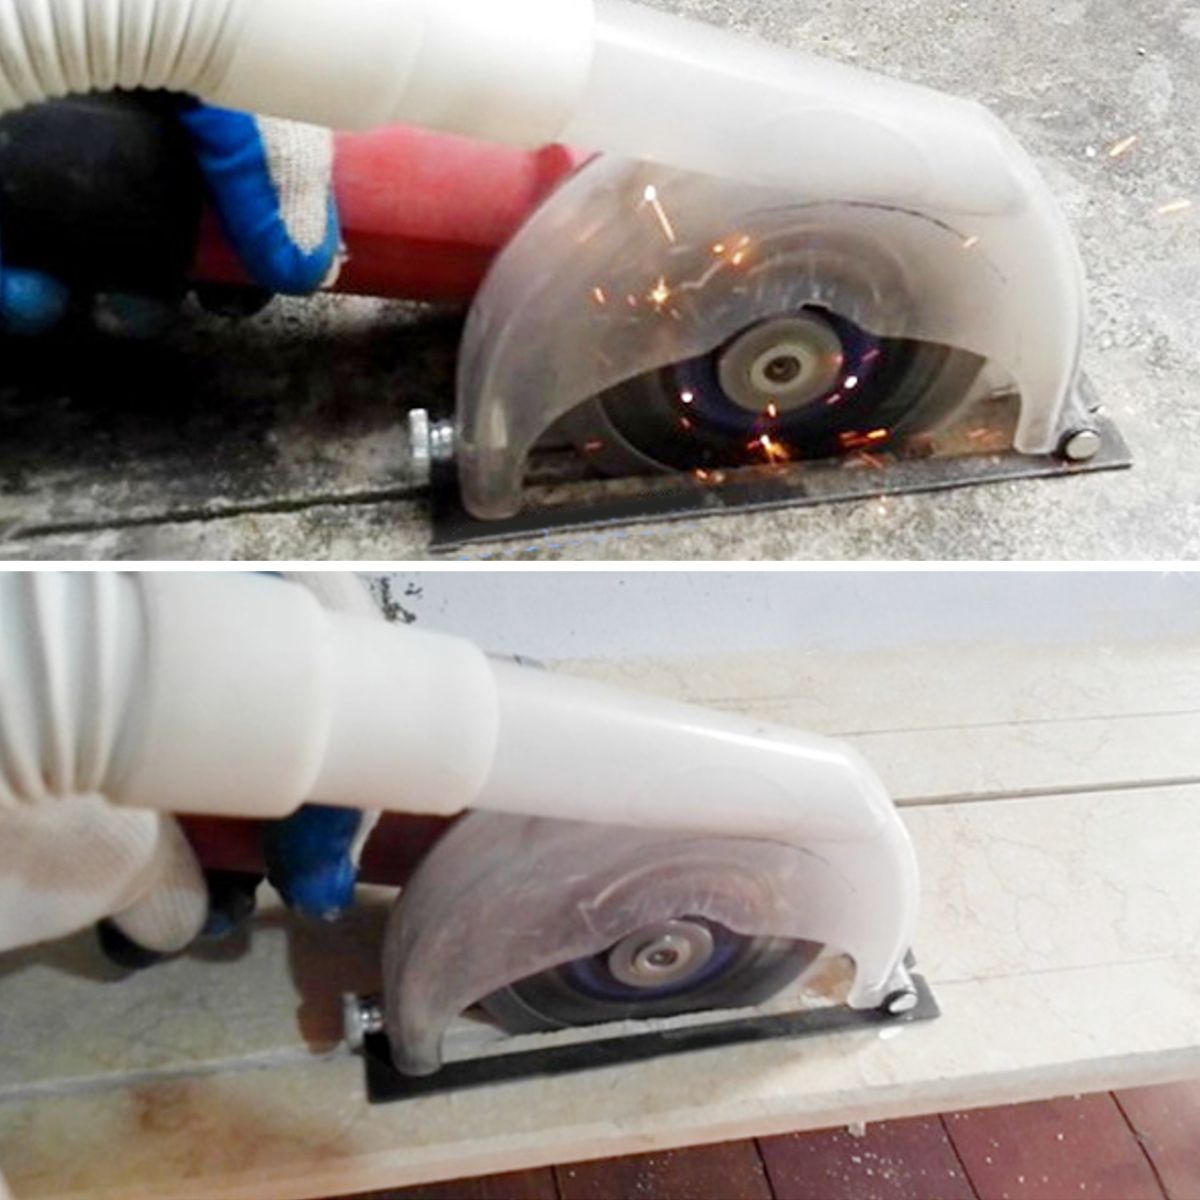 B-110A-Safety-Protective-Cover-Electric-Grinder-Transparent-Cover-Shield-for-Grinder-1260544